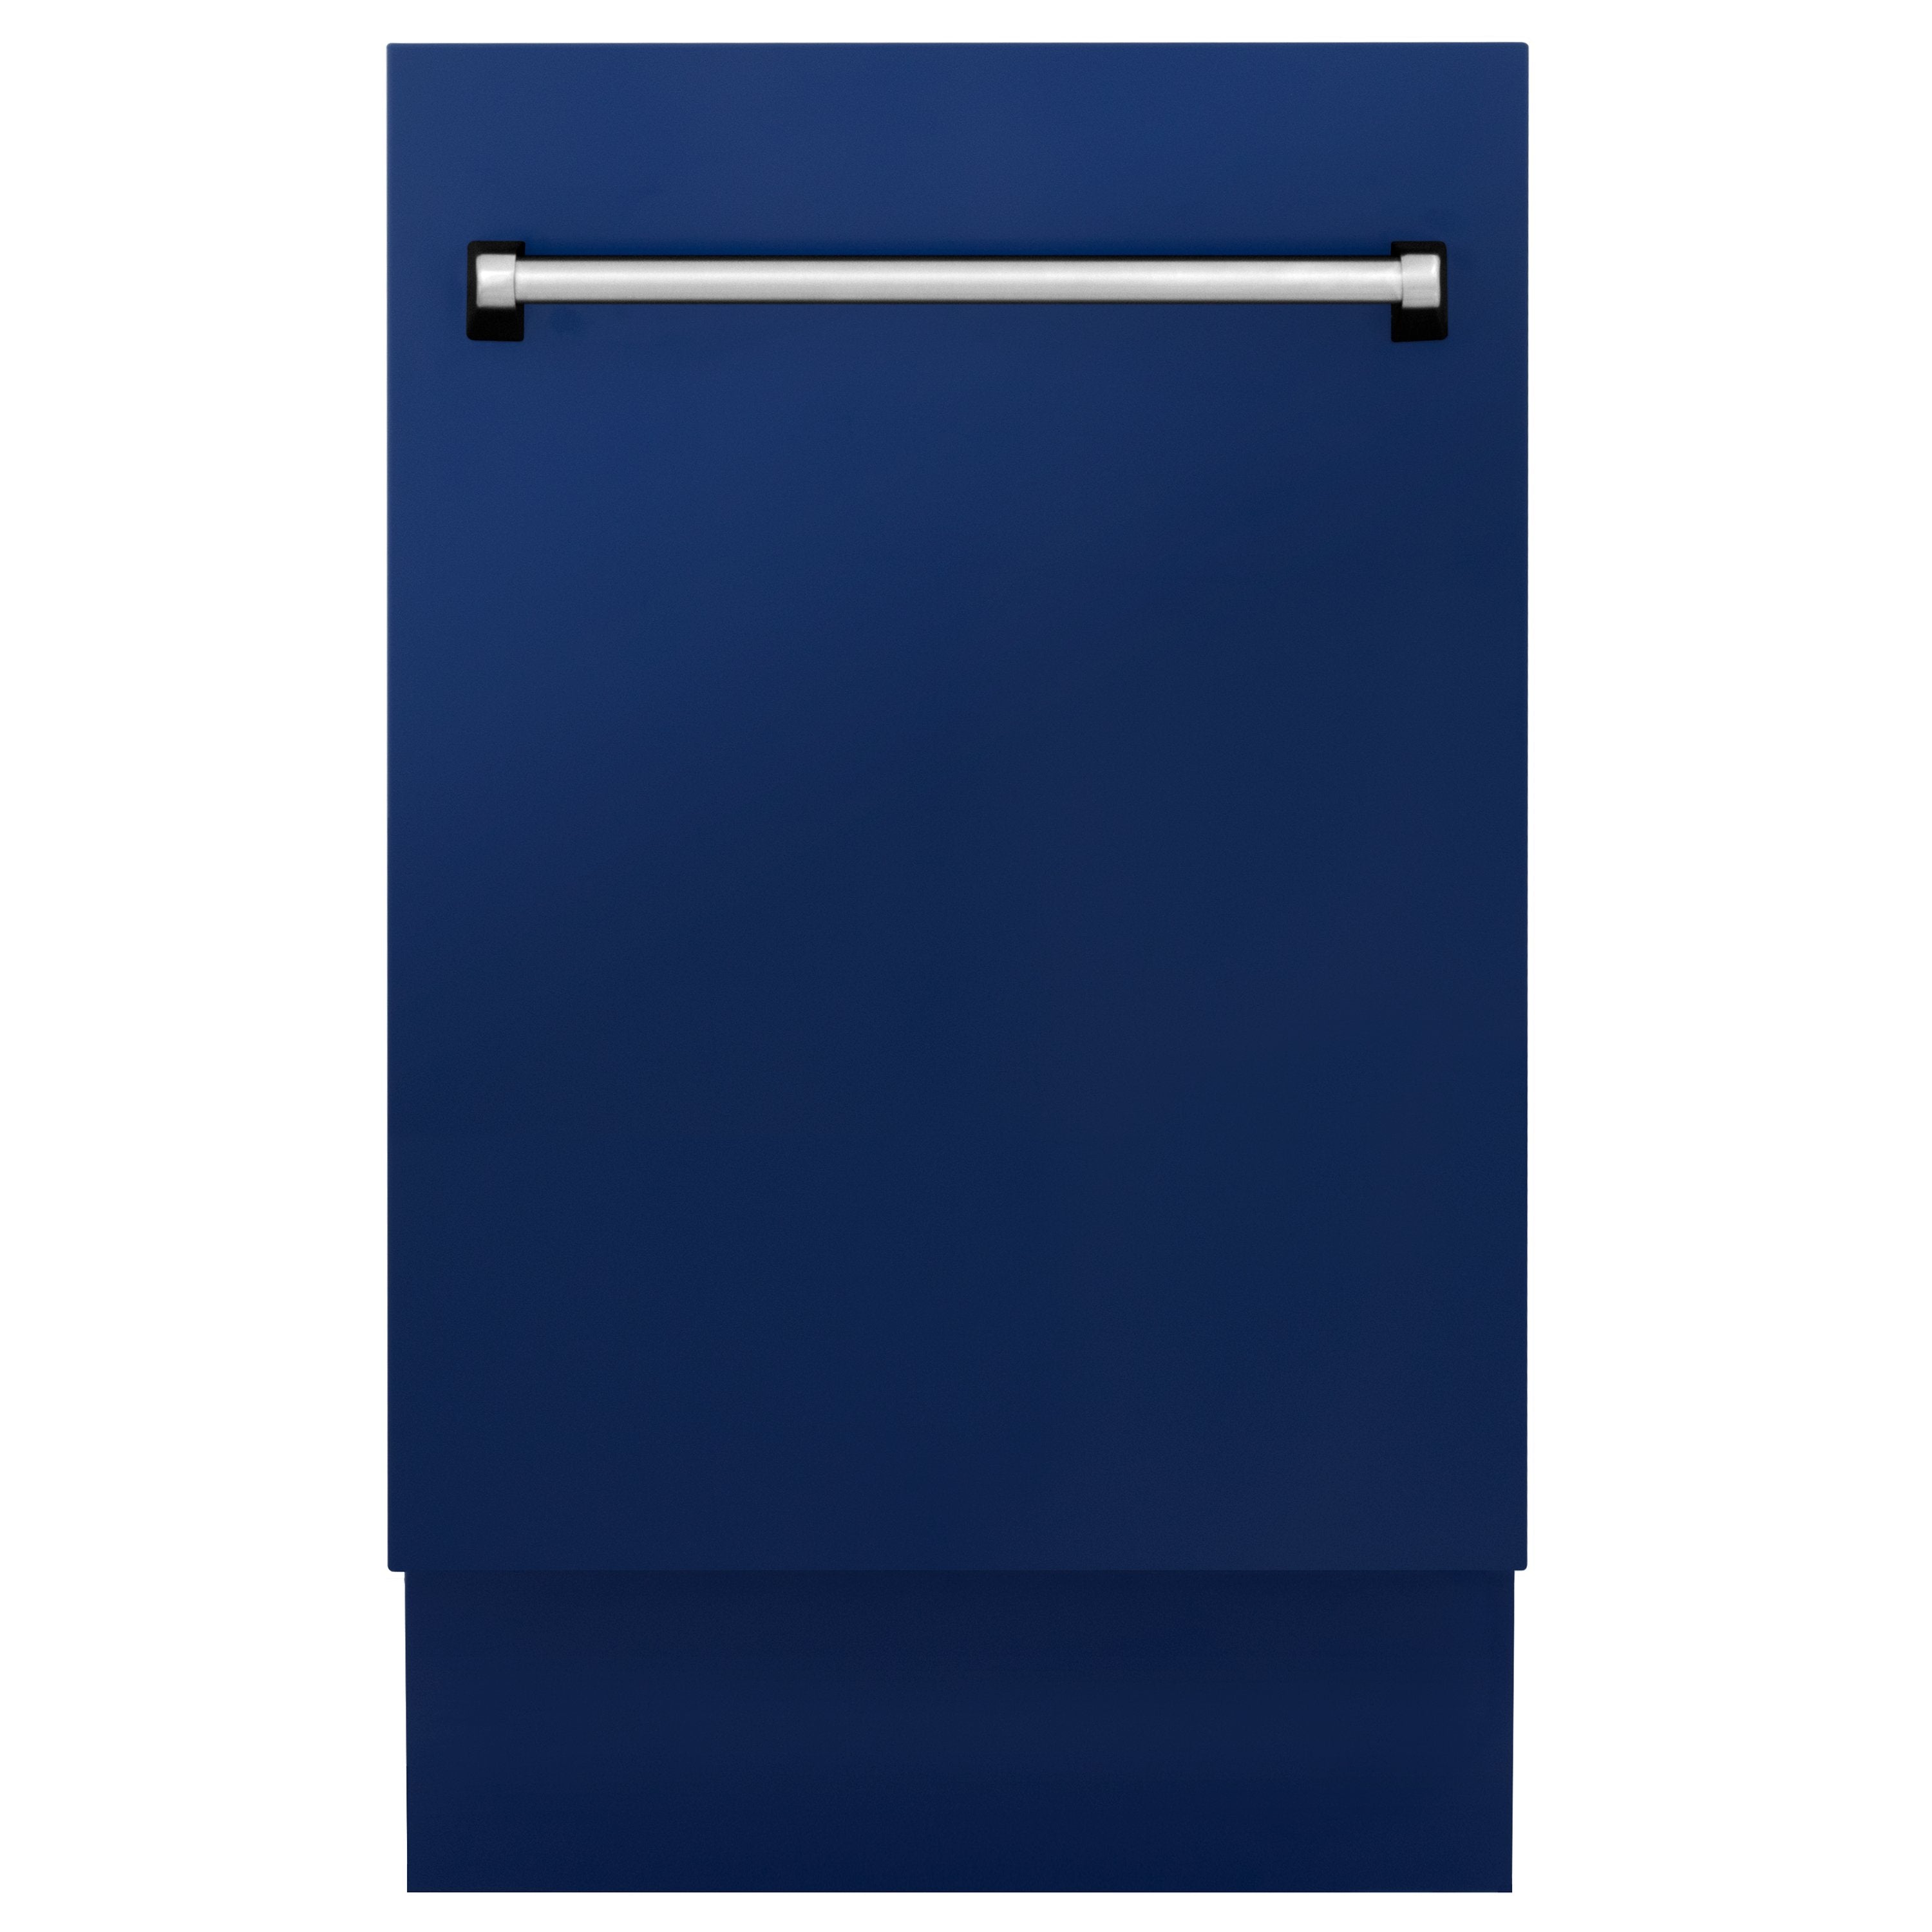 ZLINE 18 in. Top Control Tall Dishwasher in Blue Gloss with 3rd Rack